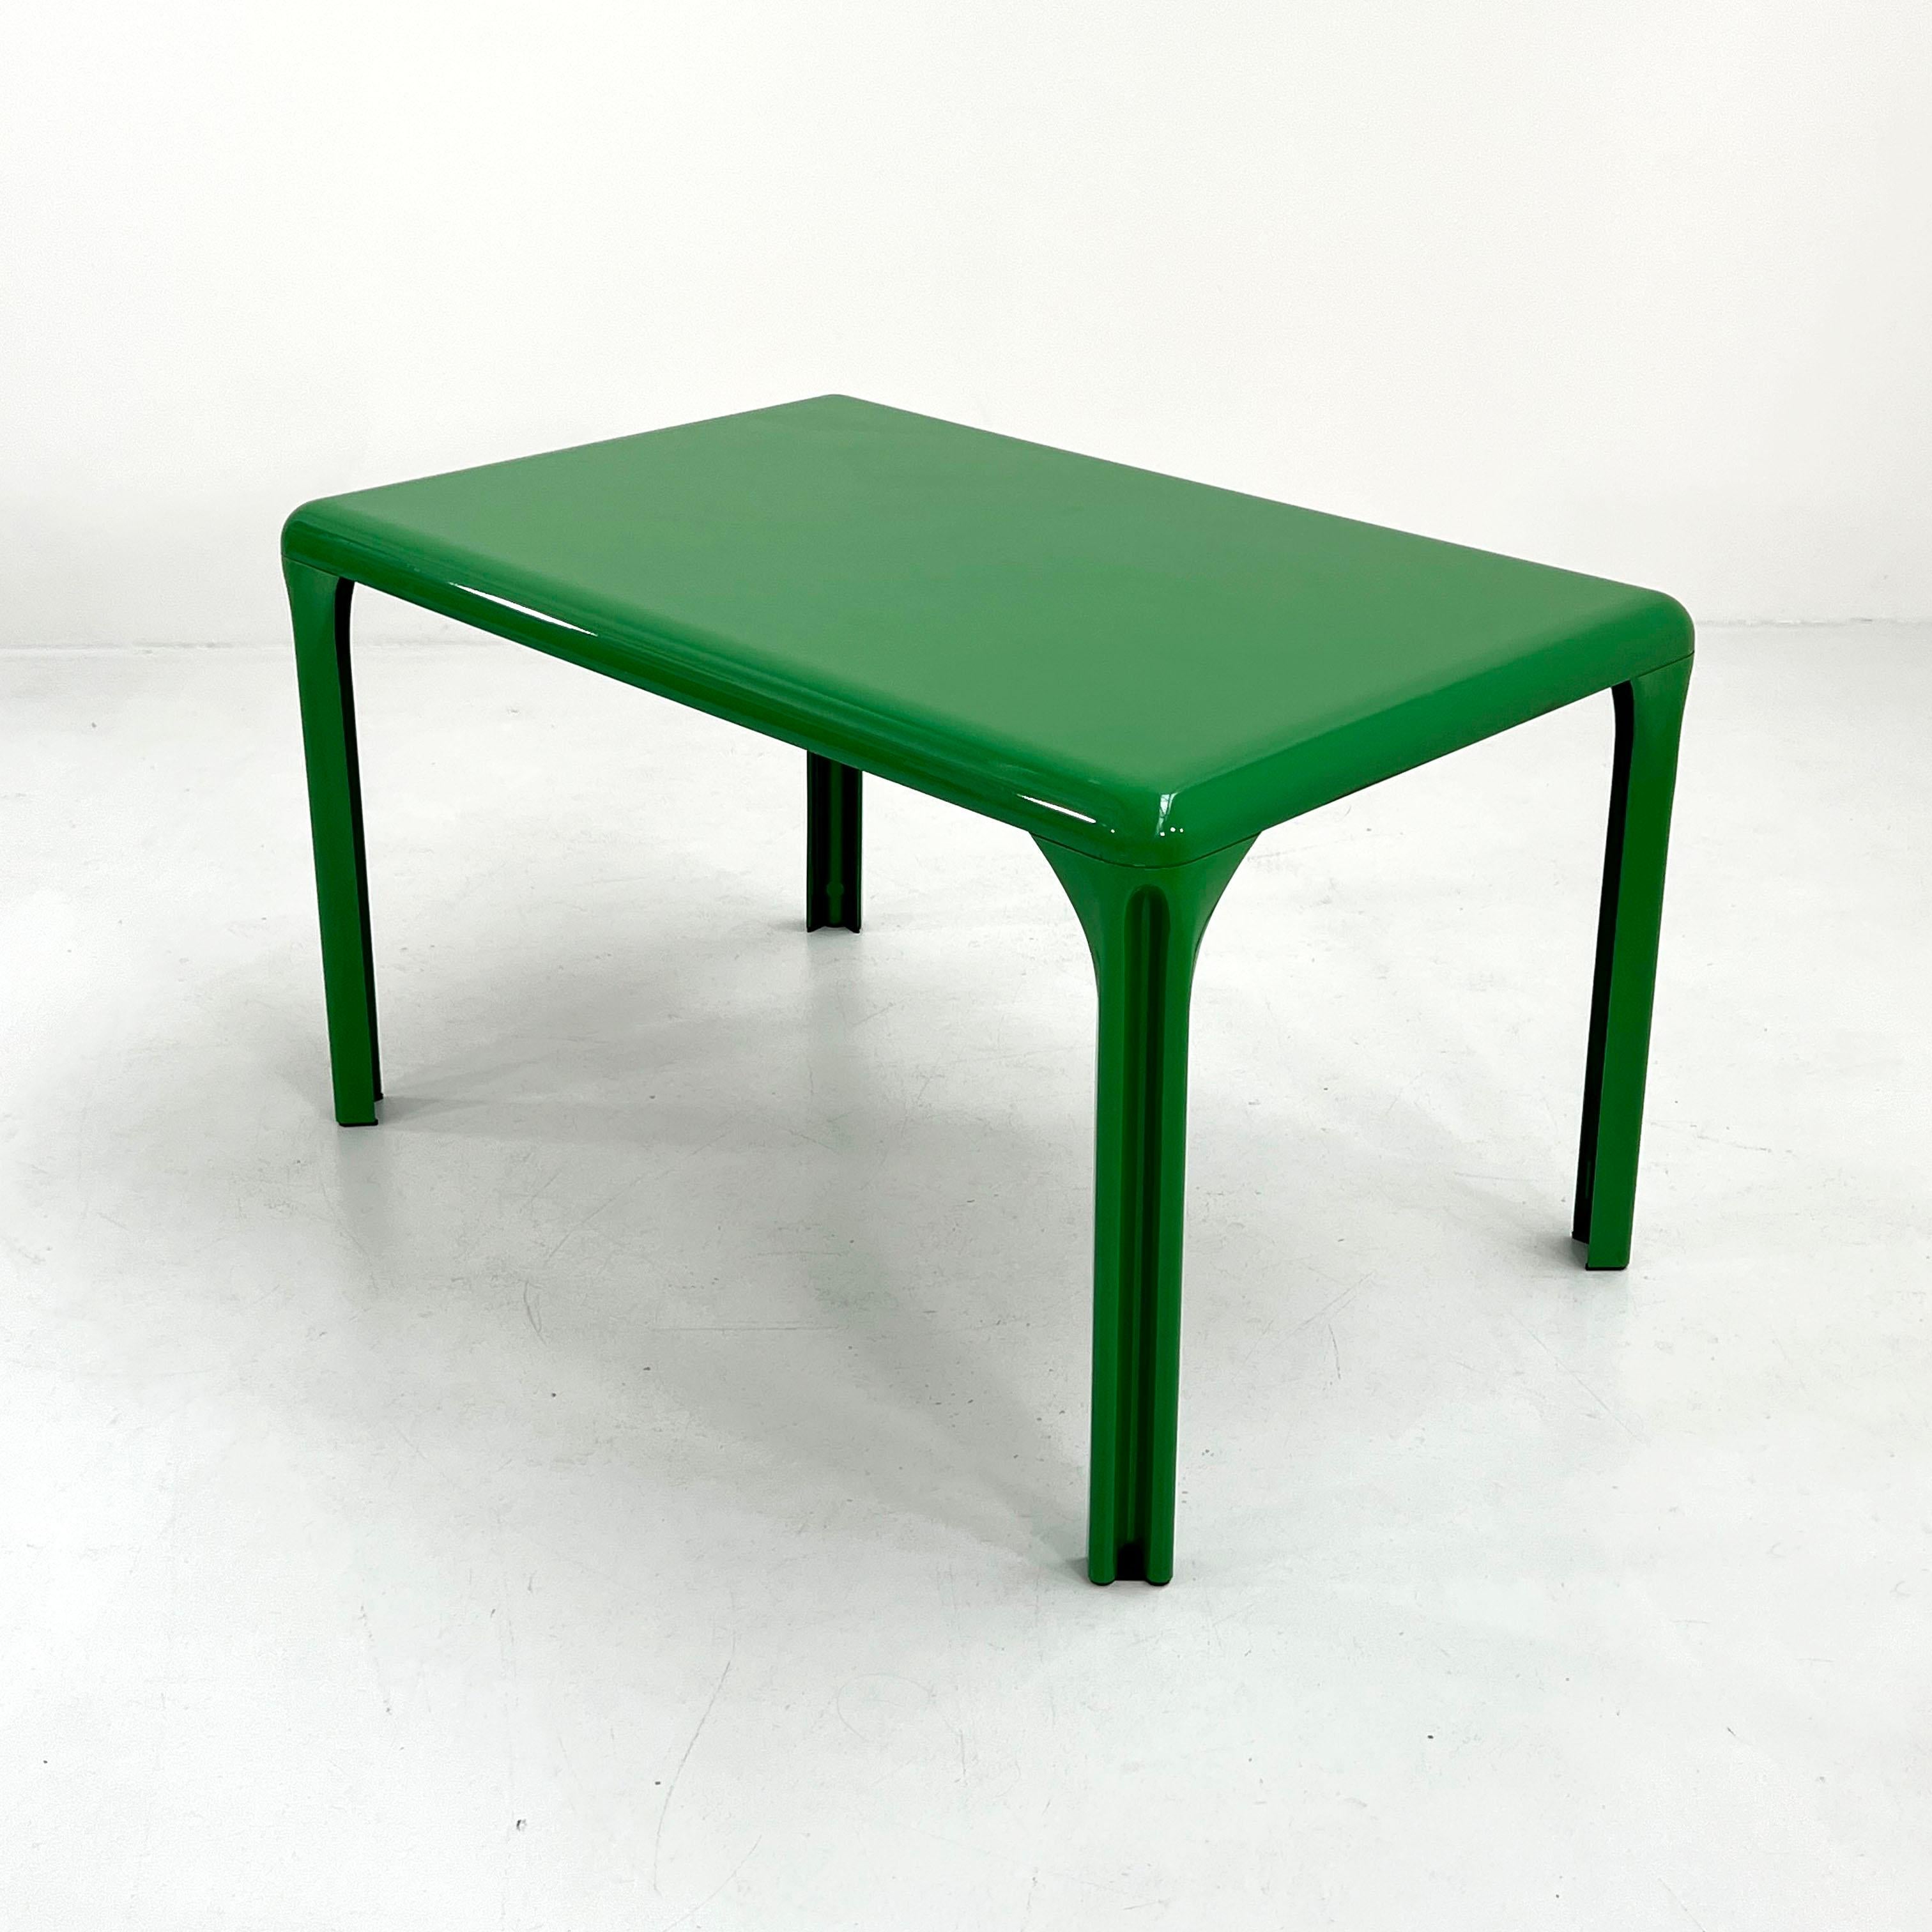 Designer - Vico Magistretti
Producer - Artemide
Model - Stadio 120 Dining Table
Design Period - Seventies
Measurements - Width 120 cm x Depth 82 cm x Height 72 cm
Materials - Plastic
Color - Green
Light wear consistent with age and use.